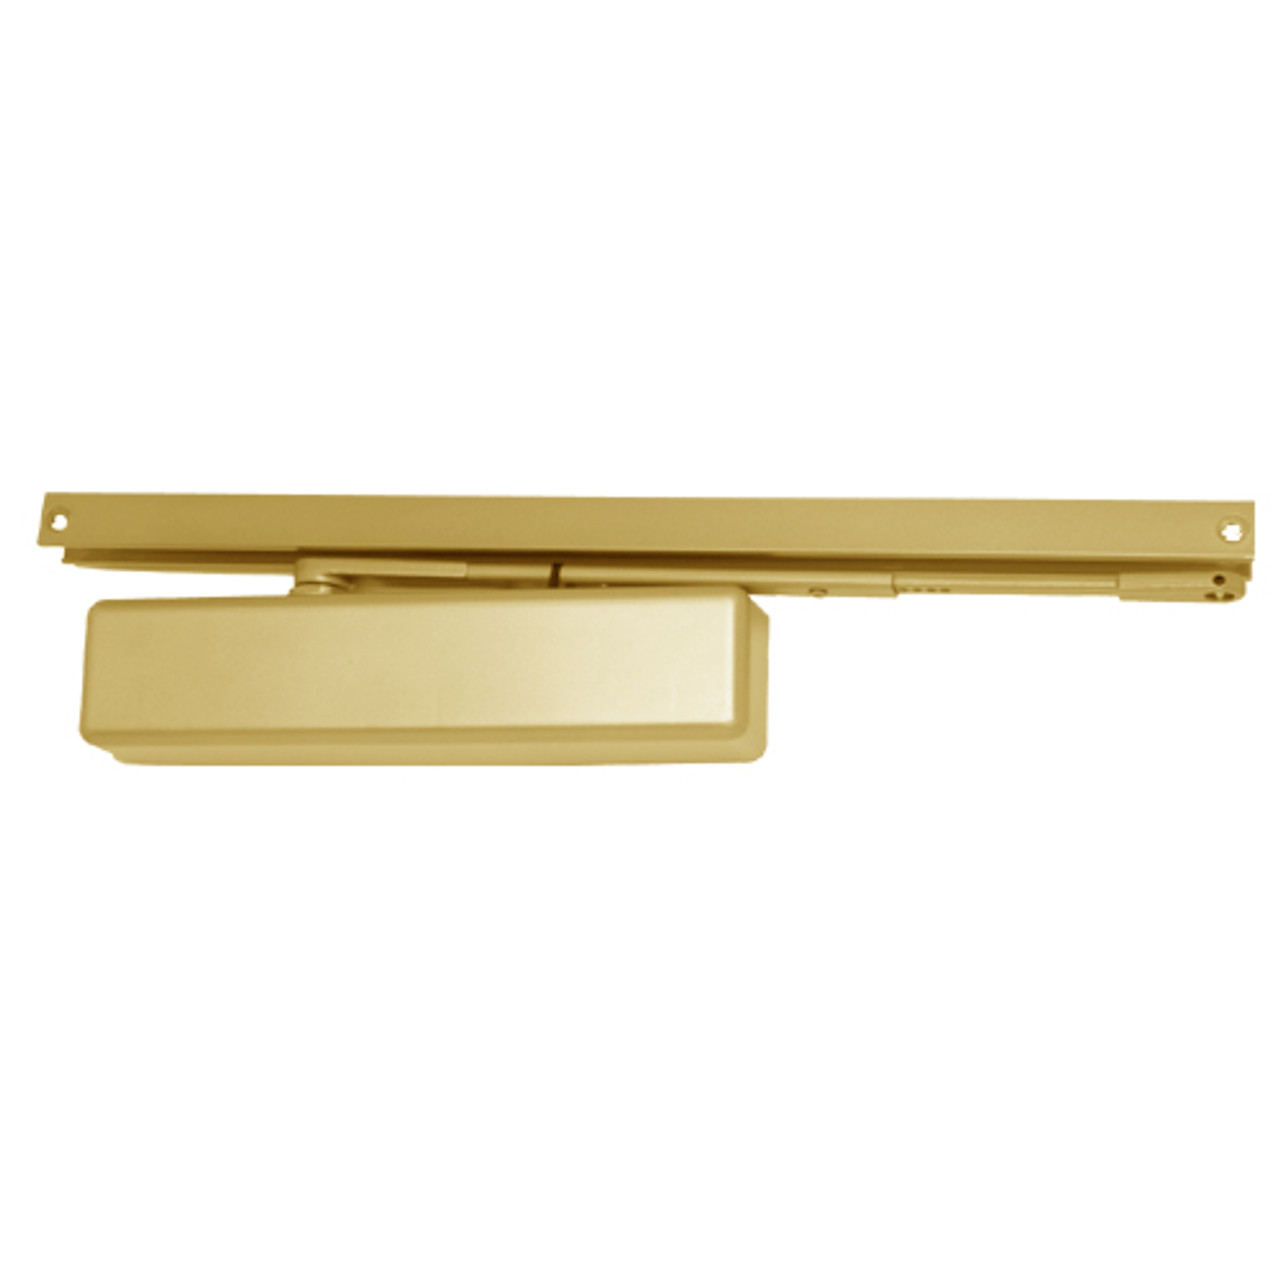 1461T-BUMPER-US3-FC LCN Surface Mount Door Closer with Bumper Arm in Bright Brass Finish